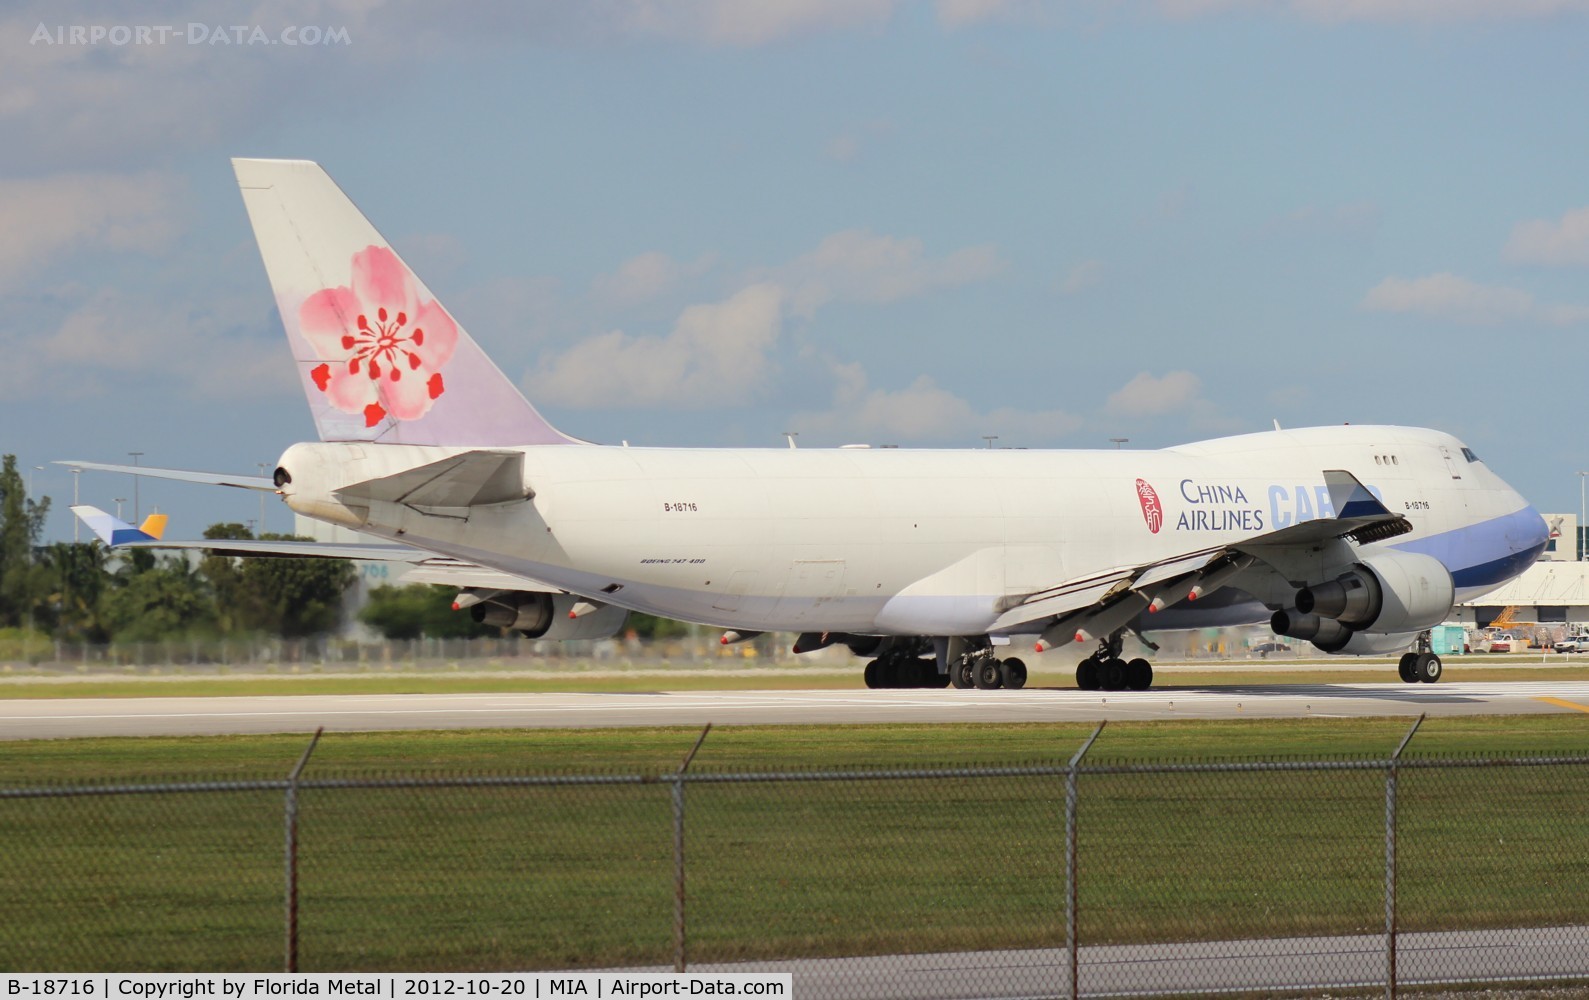 B-18716, 2003 Boeing 747-409F/SCD C/N 33732, China Airlines Cargo 747-400